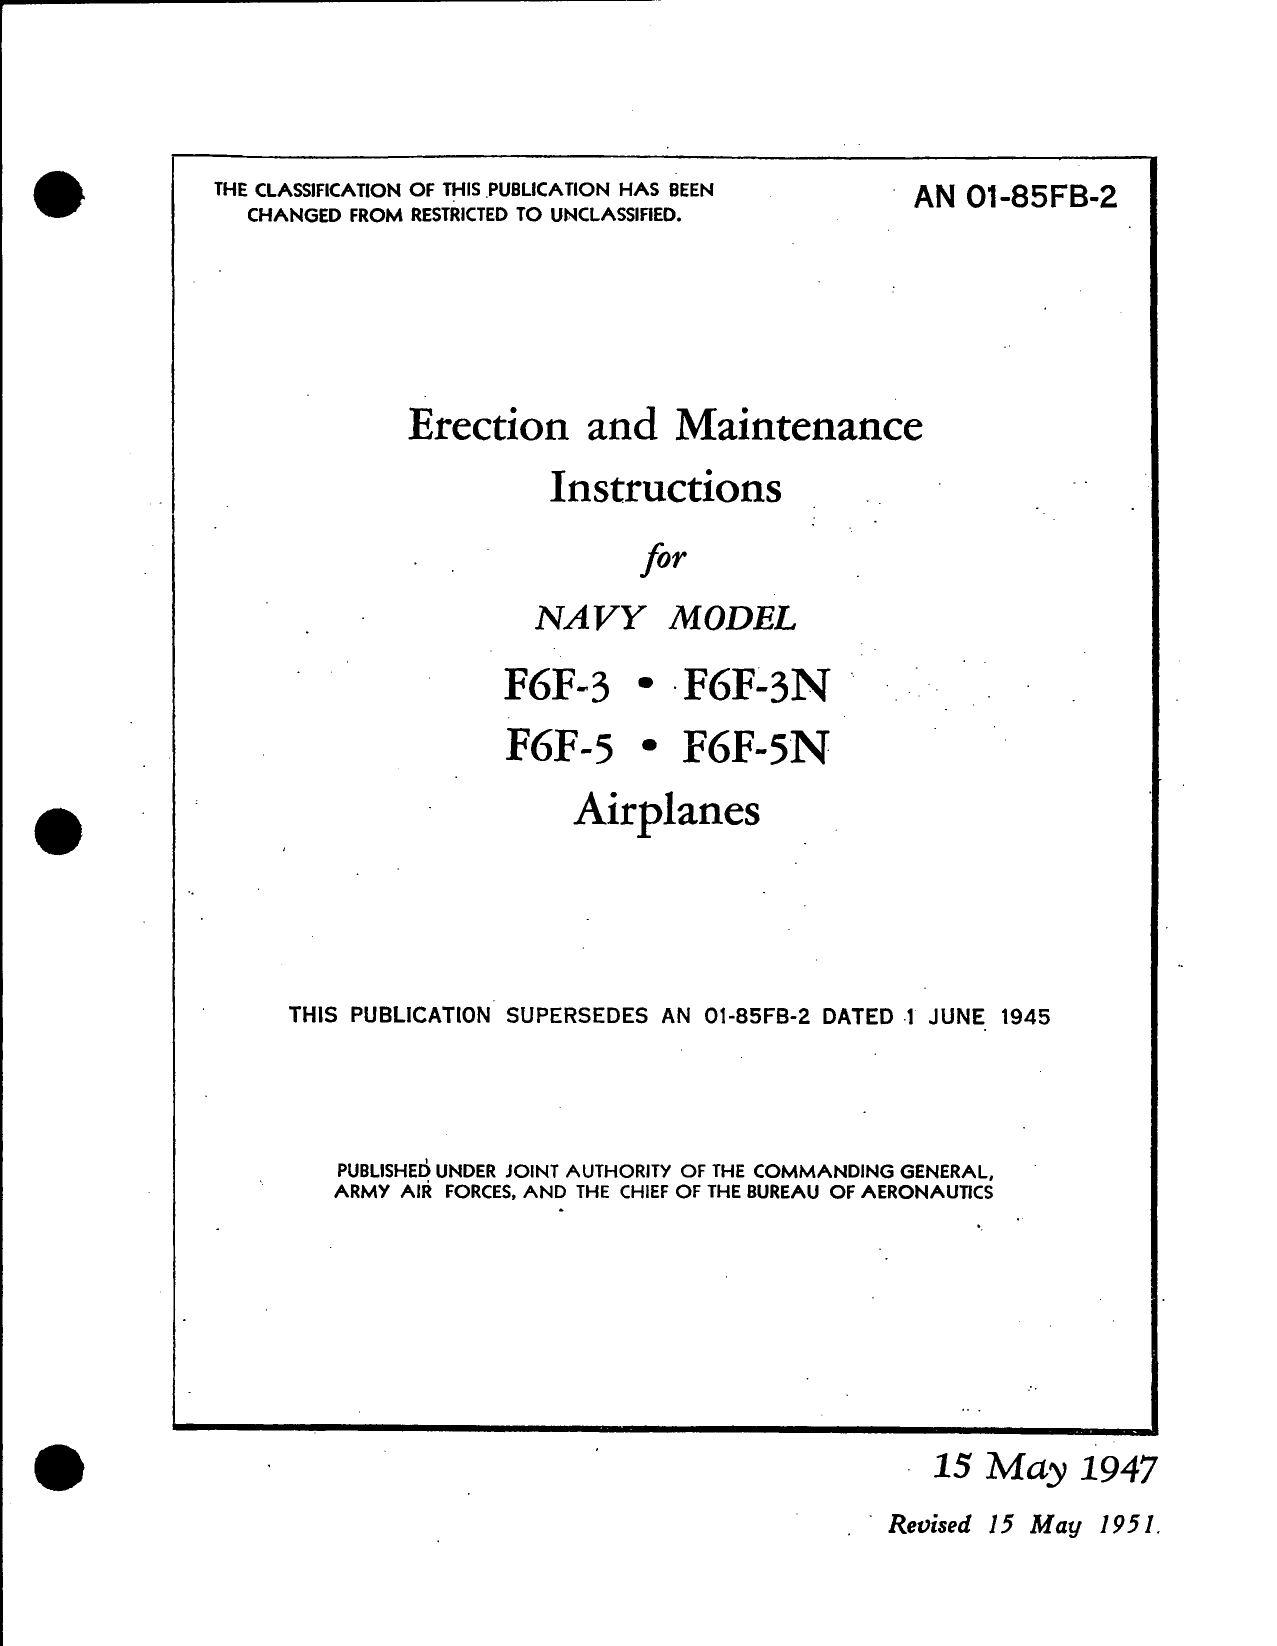 Sample page 1 from AirCorps Library document: Erection and Maintenance Manual for Navy Models F6F-3, -3N, -5 and -5N